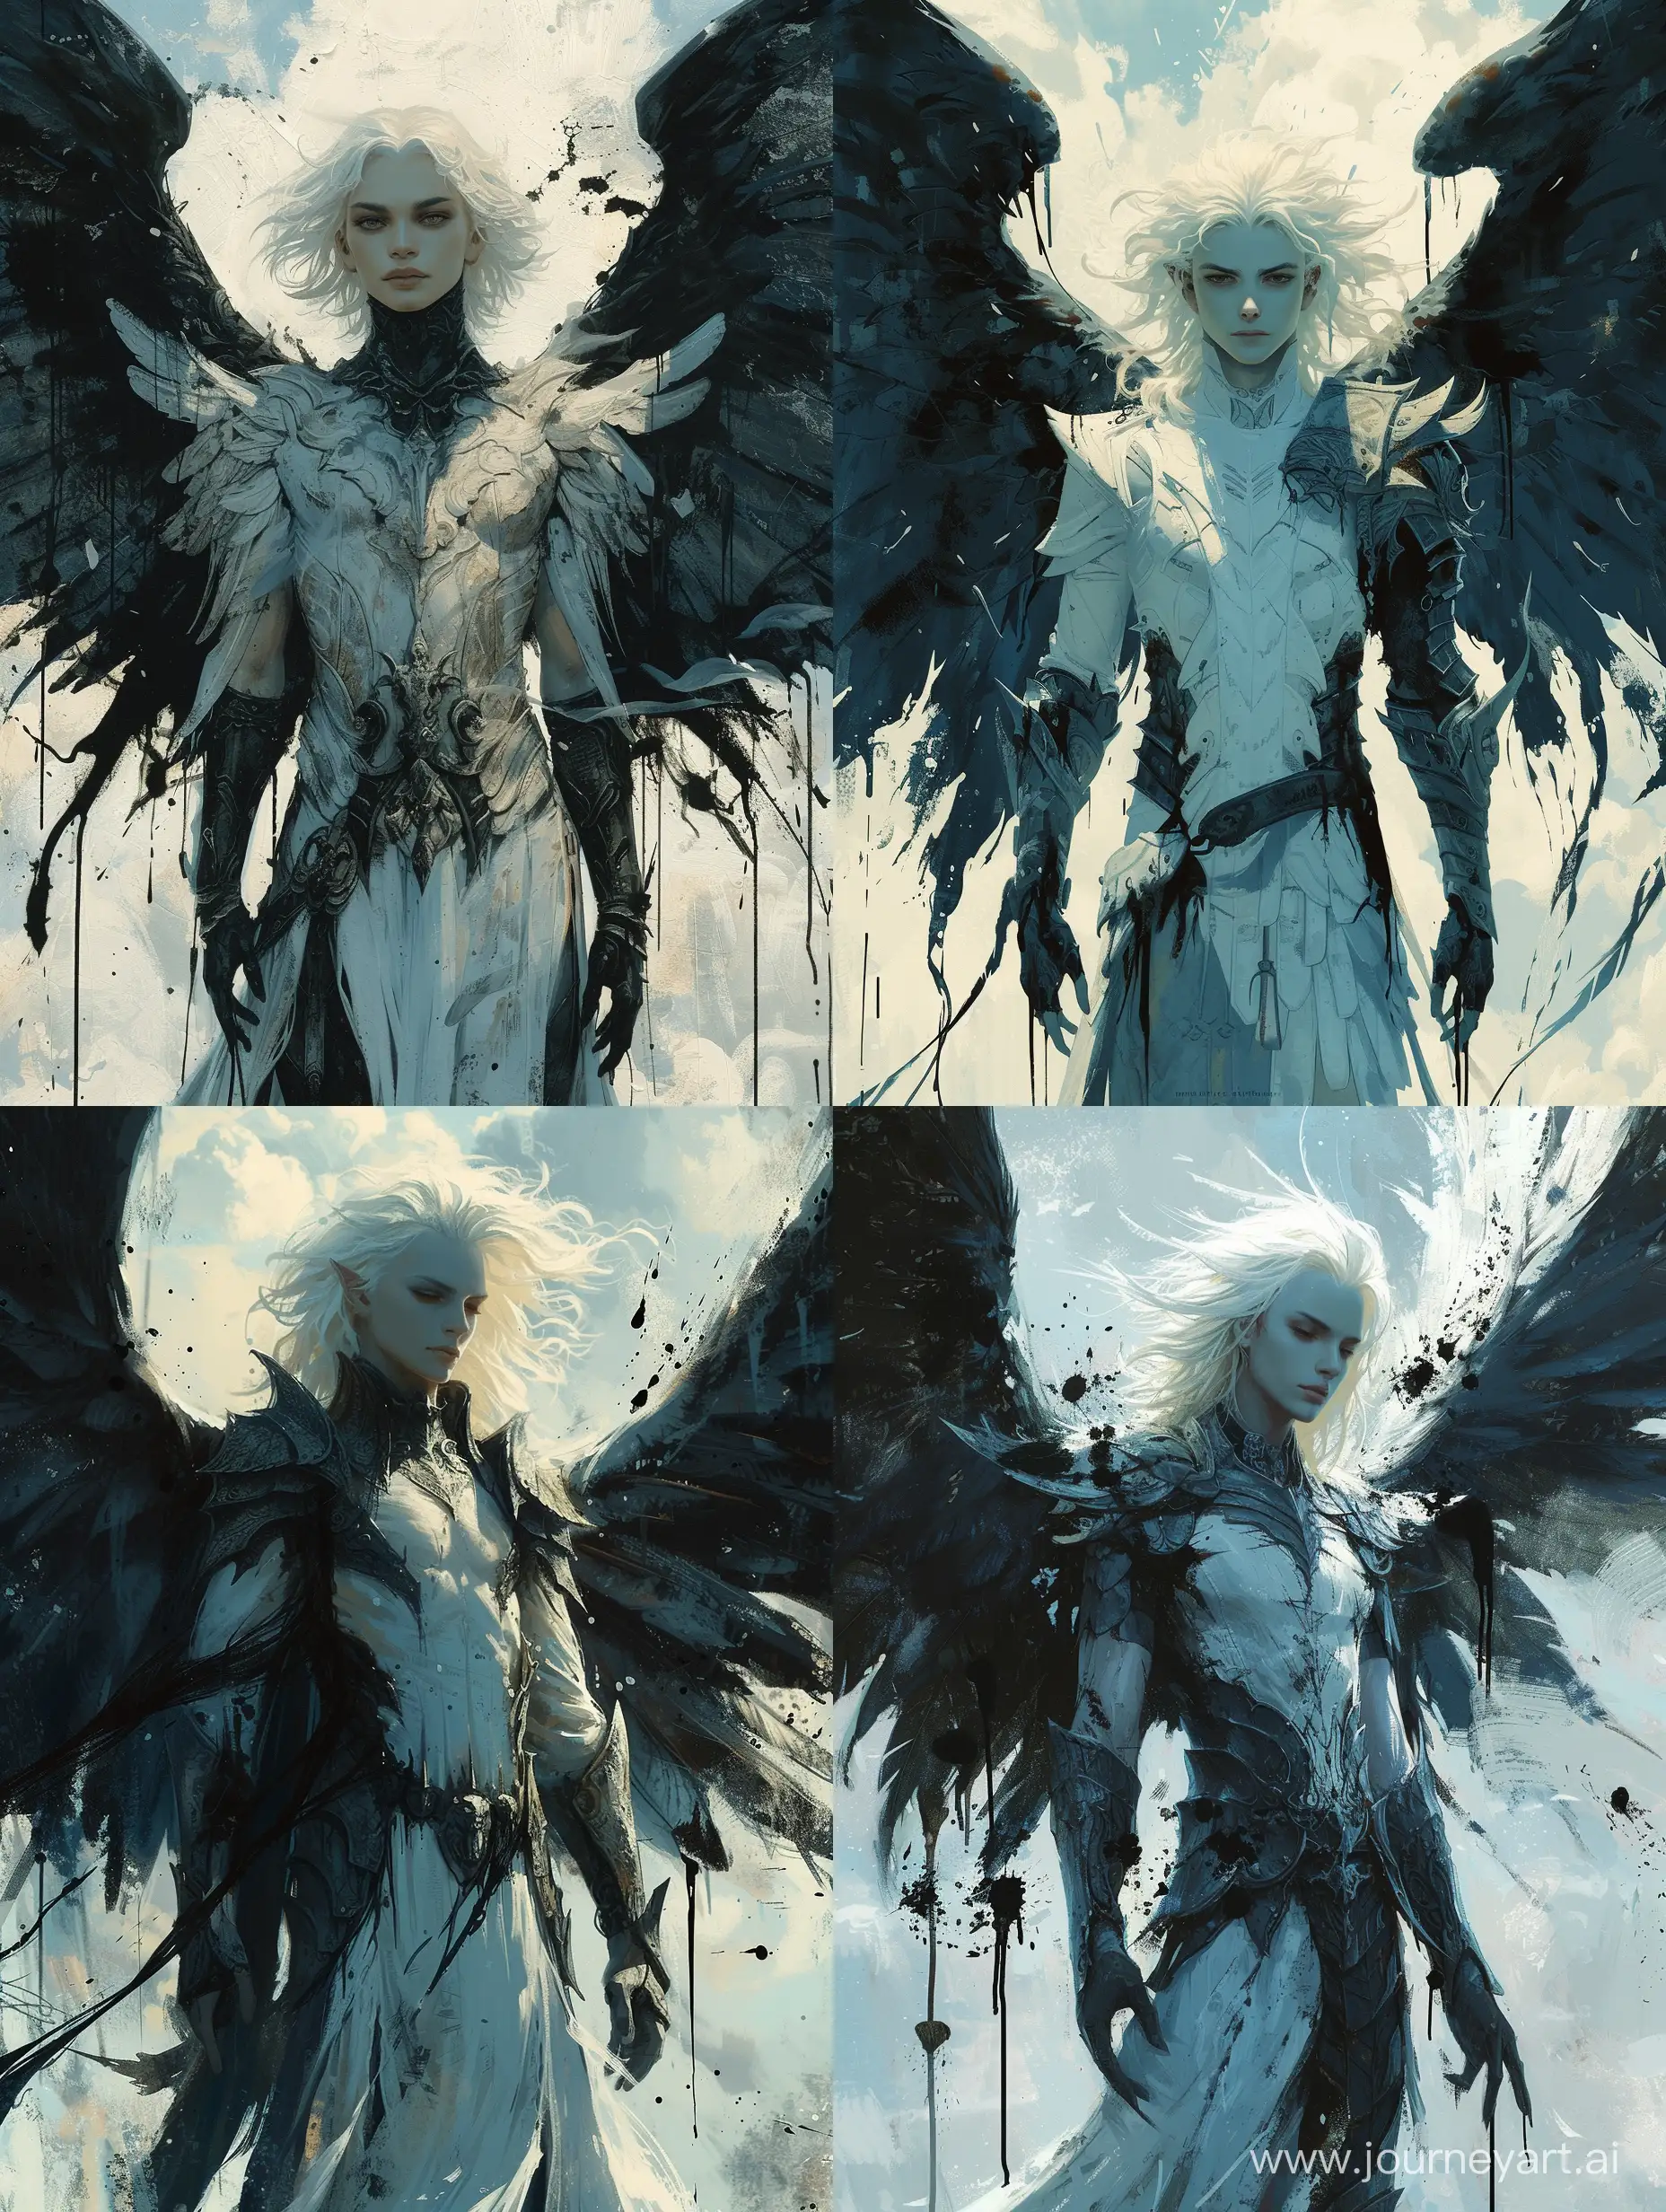 Cute expressive man white angel with large black wings, standing in front of a sky background with white and blue hues, the angel has white hair and is wearing a armor-like outfit, the wings are spread out and there are black paint drips trailing from them, --s 500